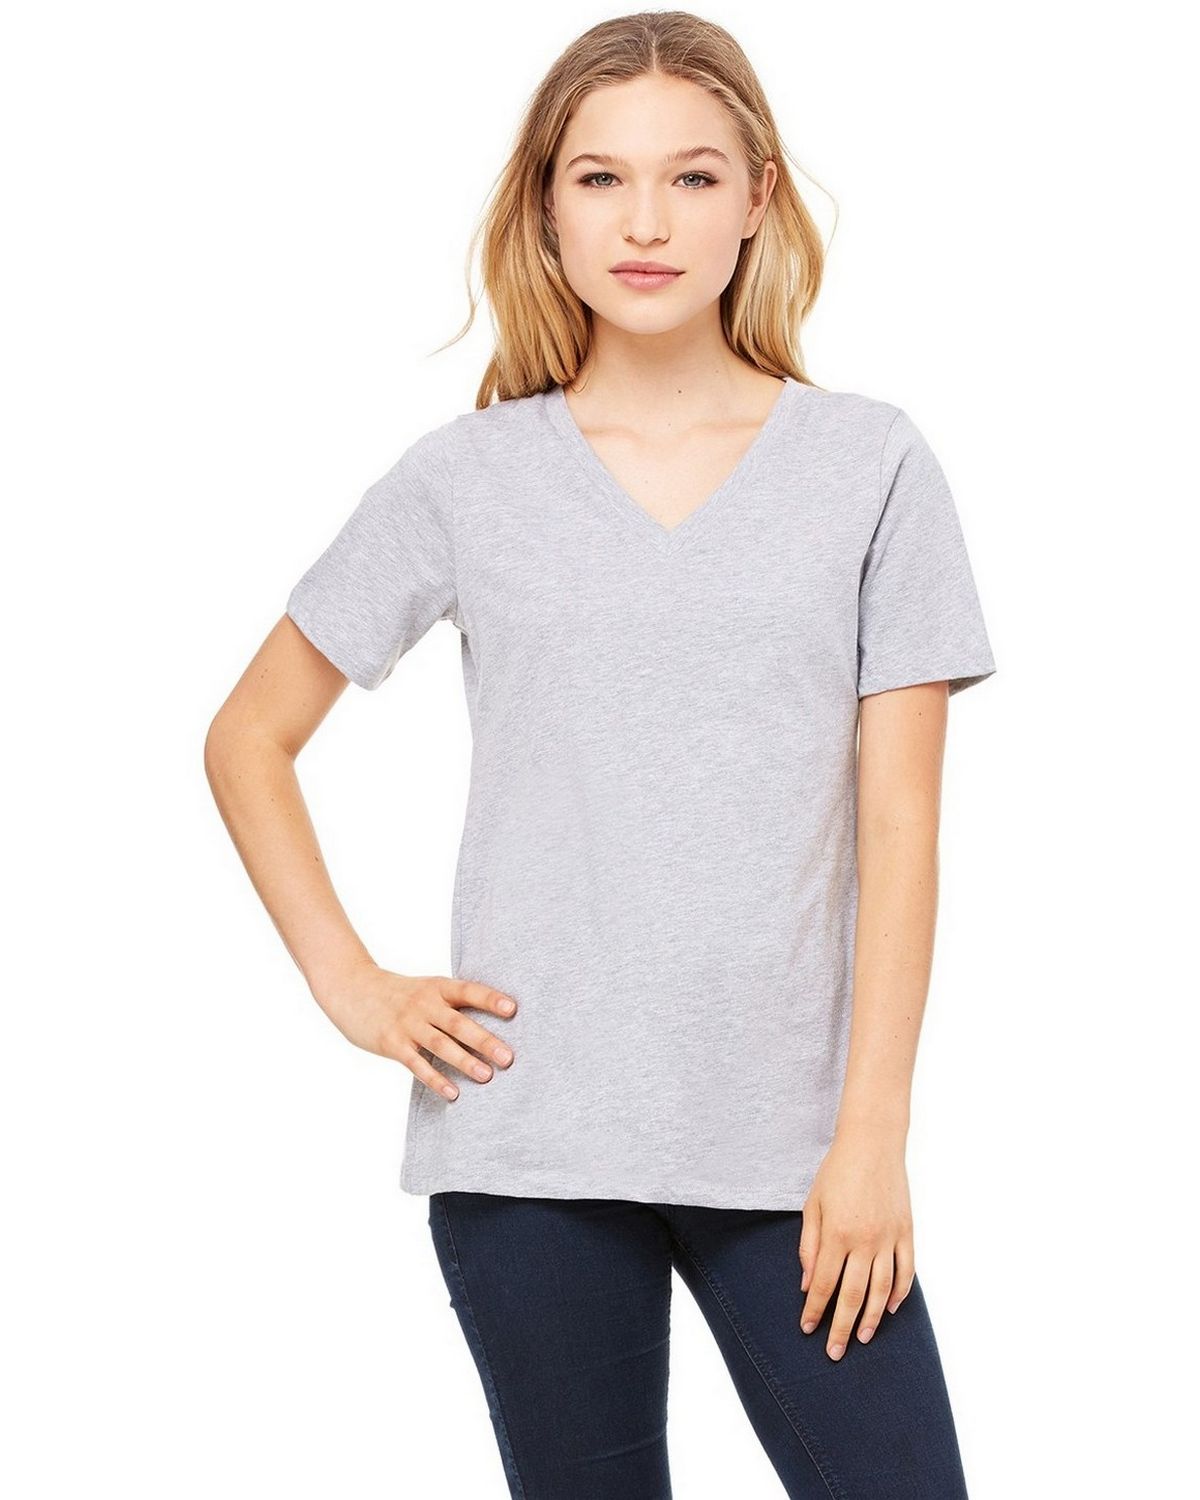 Bella + Canvas 6405 Ladies Missy’s Relaxed Jersey Short-Sleeve V-Neck T ...